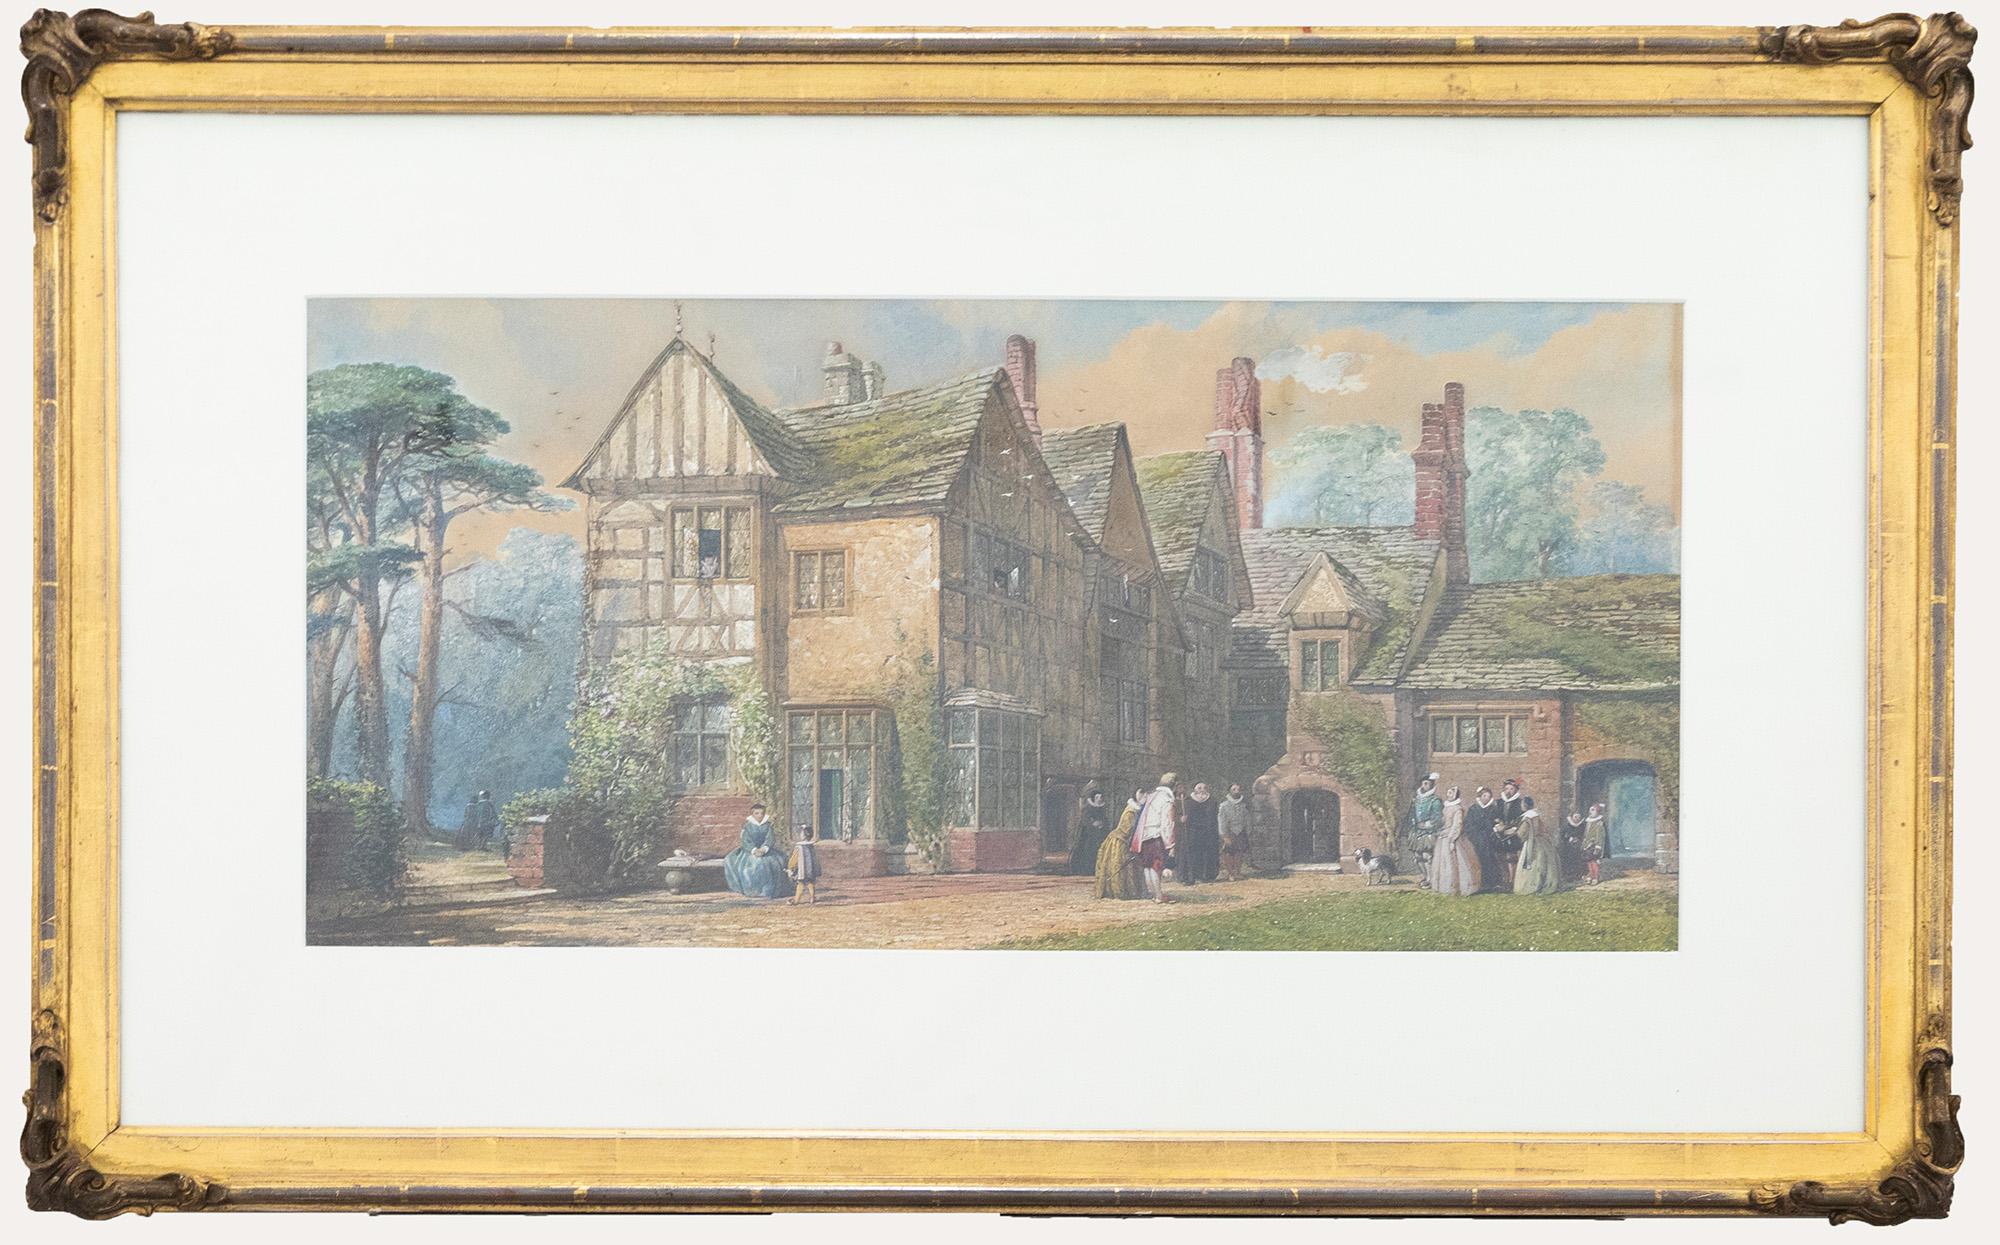 A particularly fine watercolour scene of two noble families greeting each other outside a magnificent half-timber manor. Both families look nervous by the meeting, standing at a distance as they acknowledge one another in their finest clothes. The